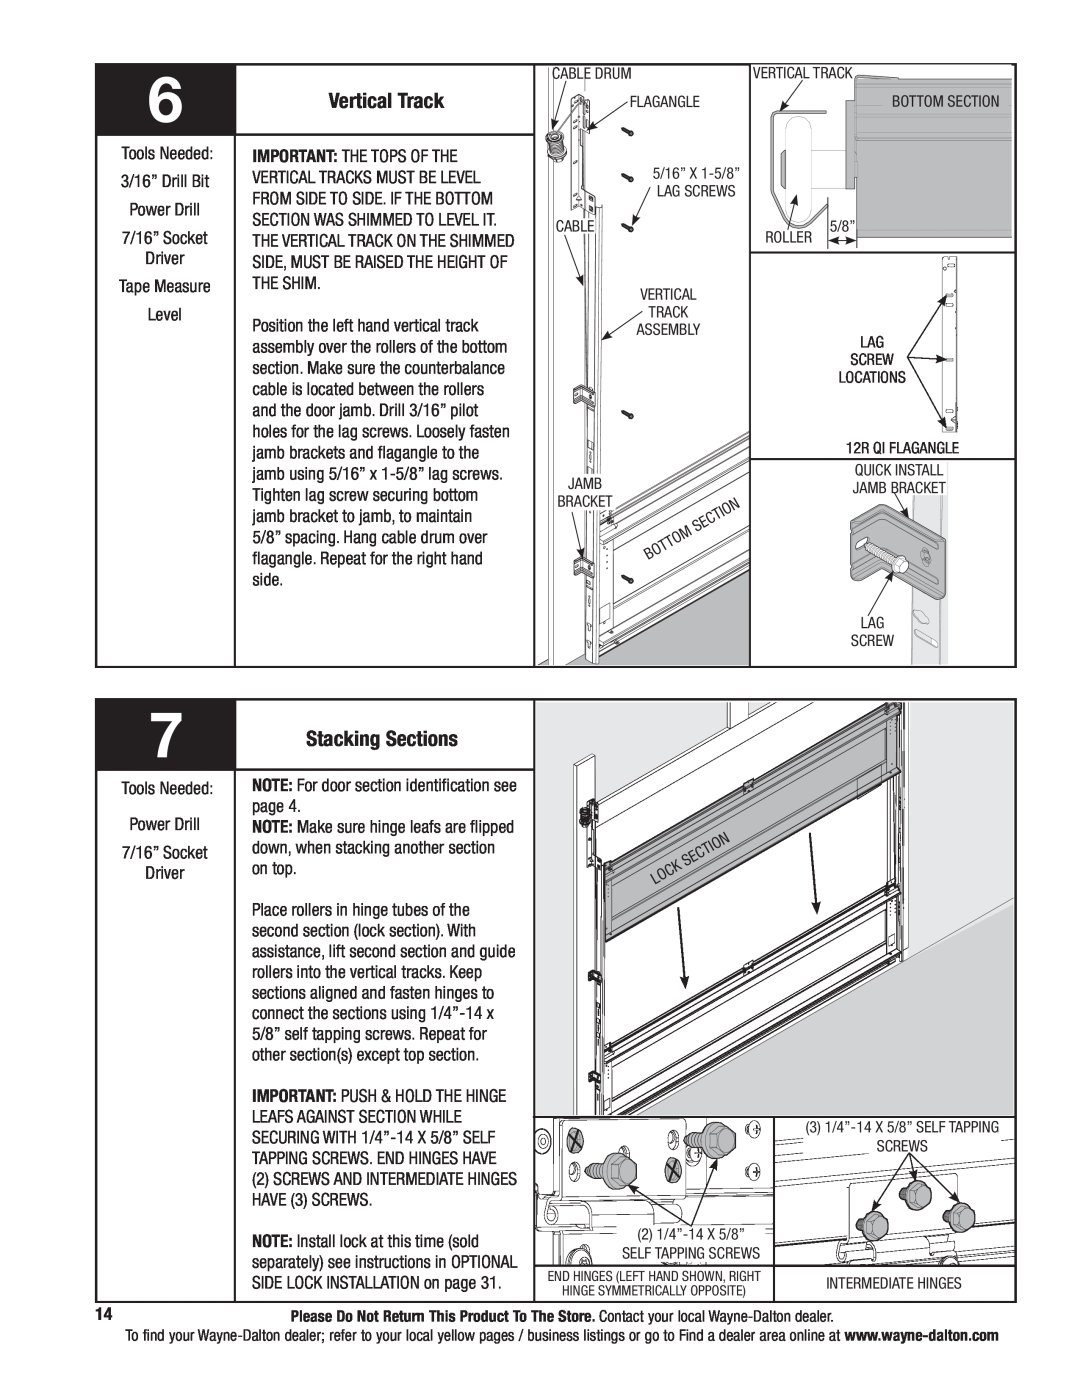 Wayne-Dalton 5140, 5120 installation instructions Vertical Track, Stacking Sections 